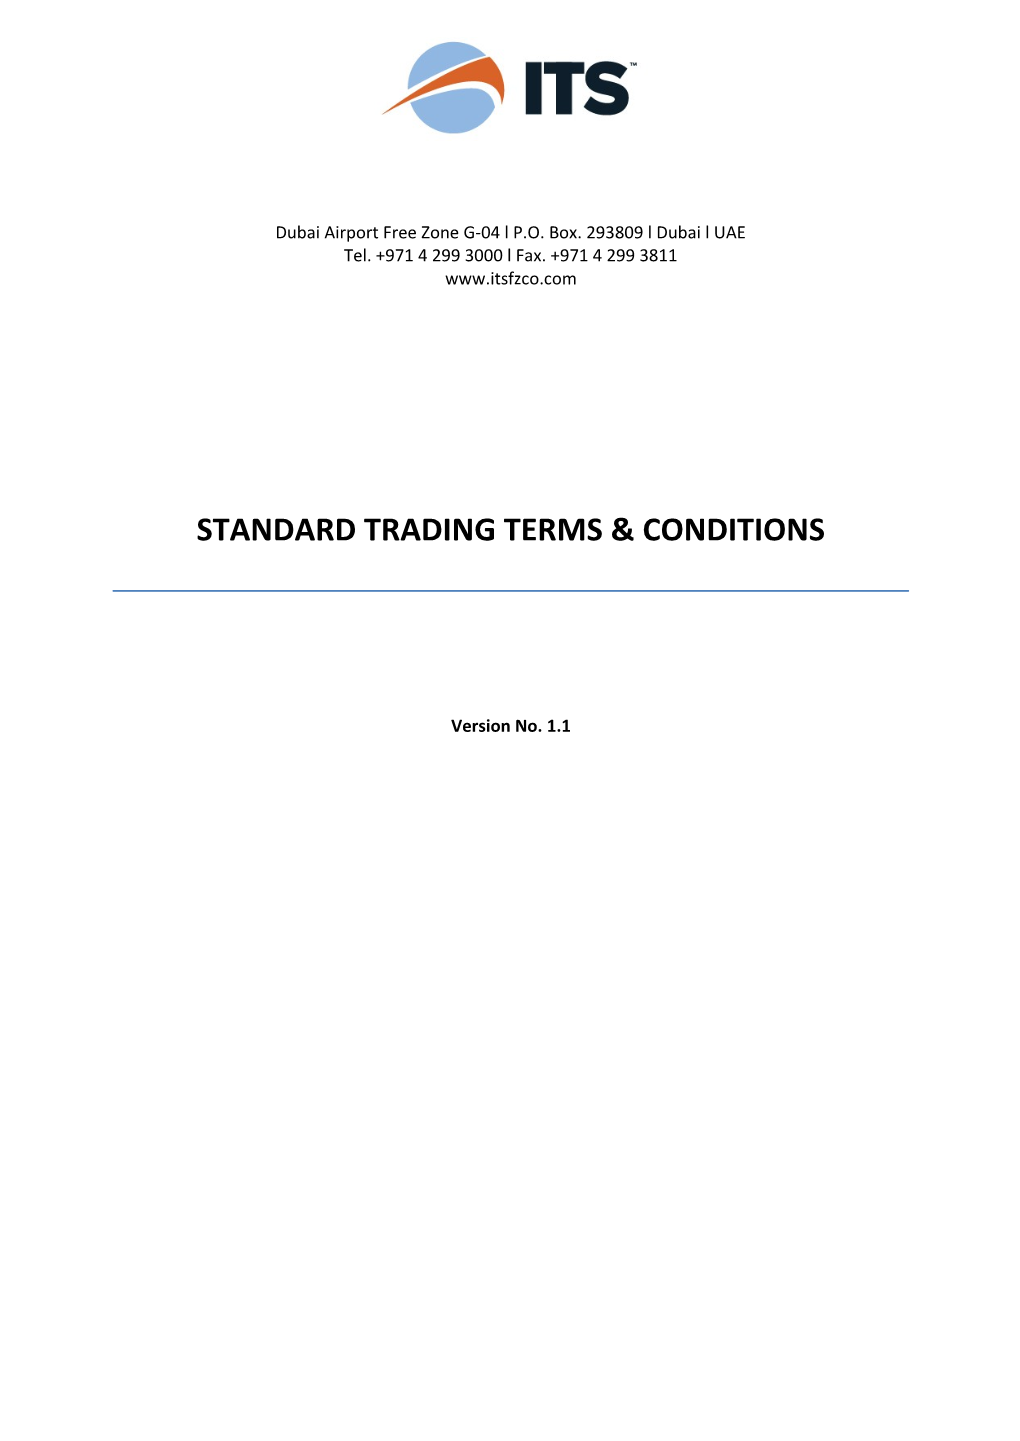 Standard Trading Terms & Conditions